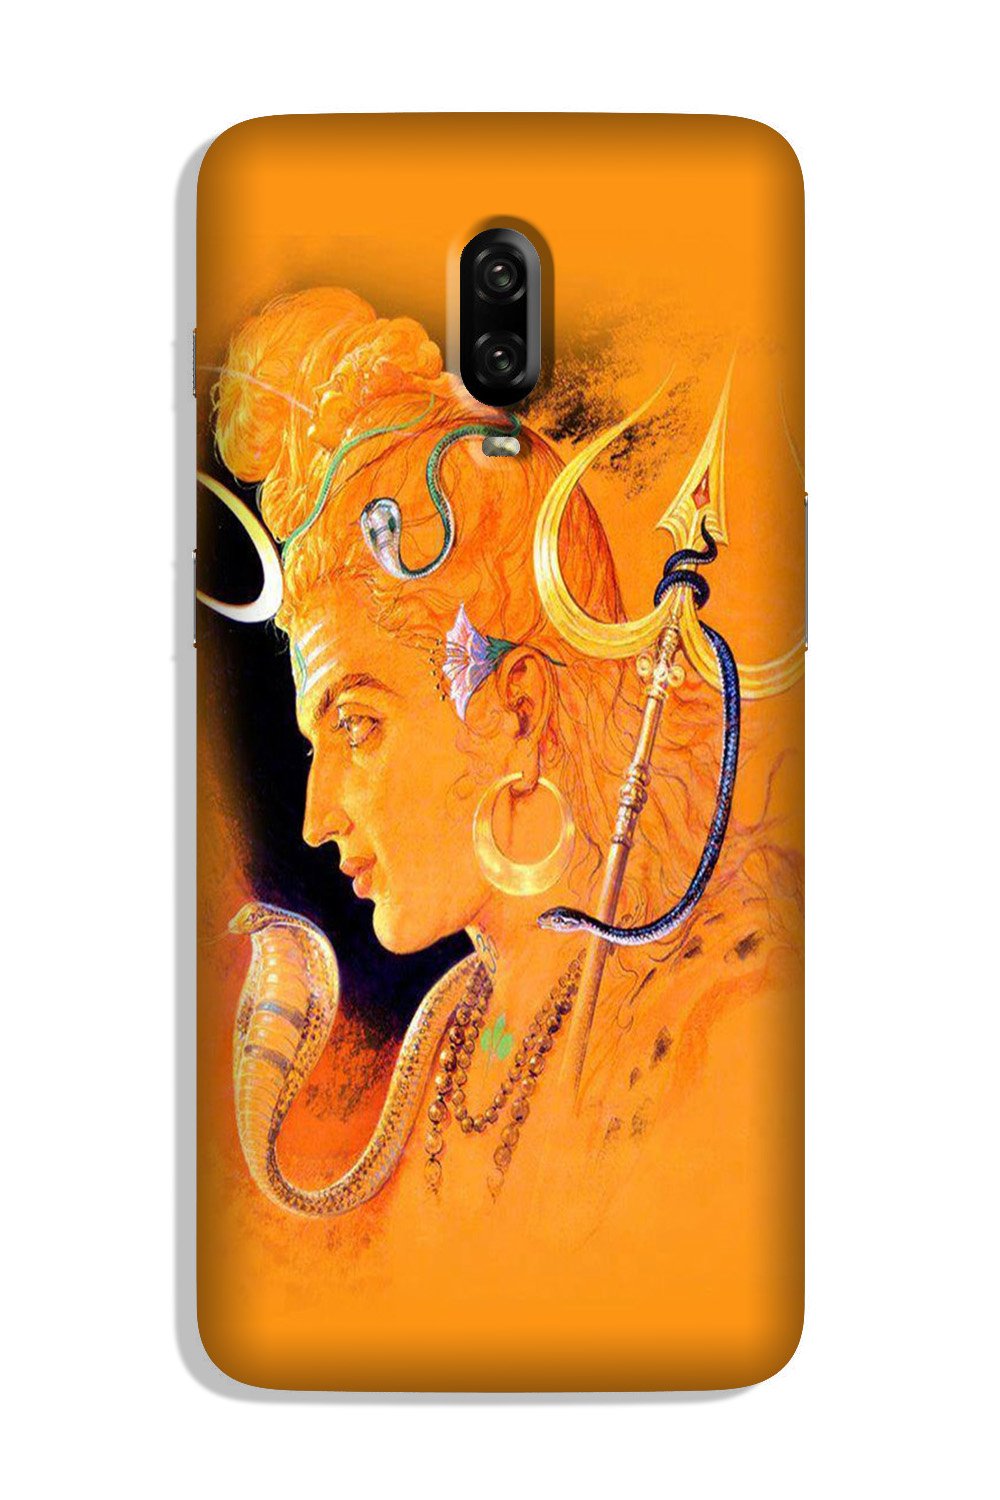 Lord Shiva Case for OnePlus 6T (Design No. 293)